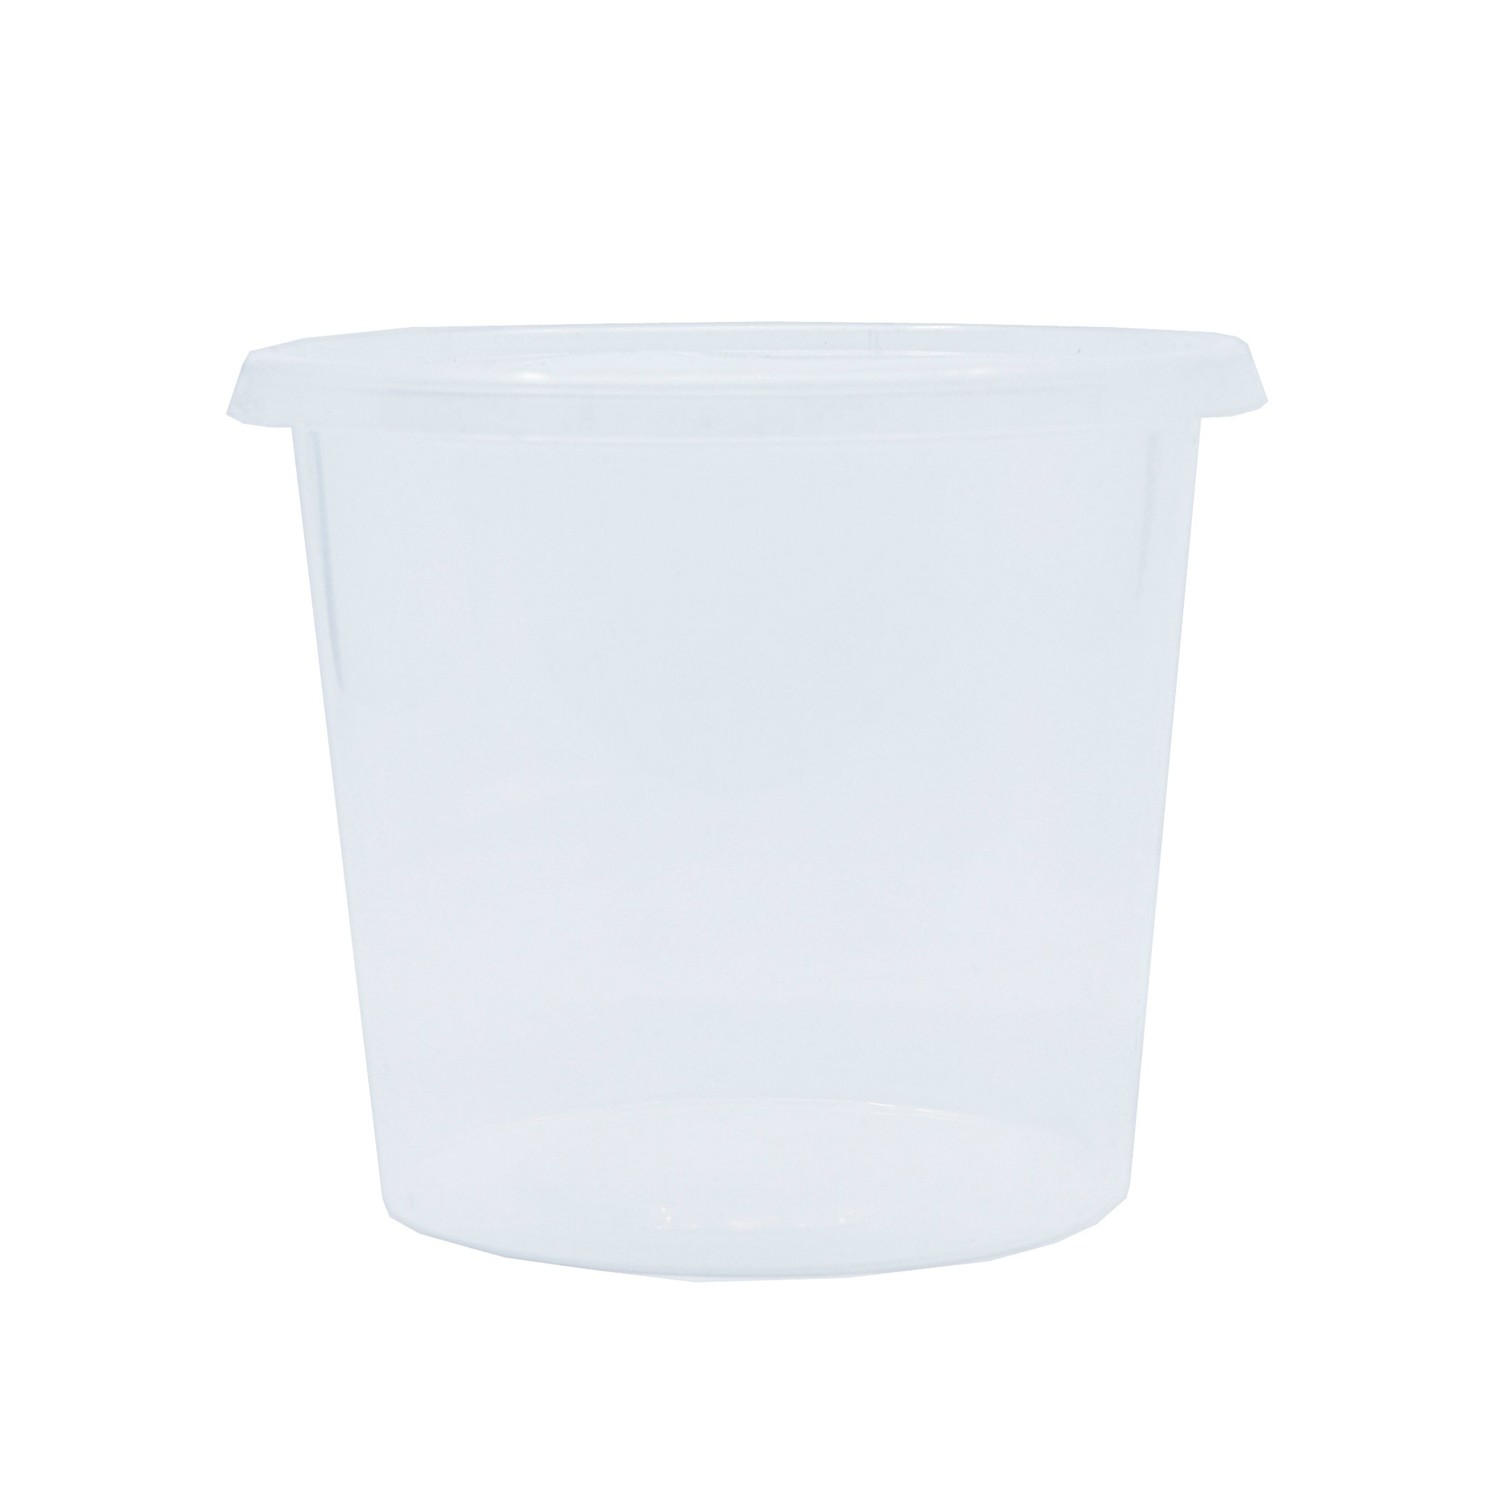 750ml, Round Microwaveable Container